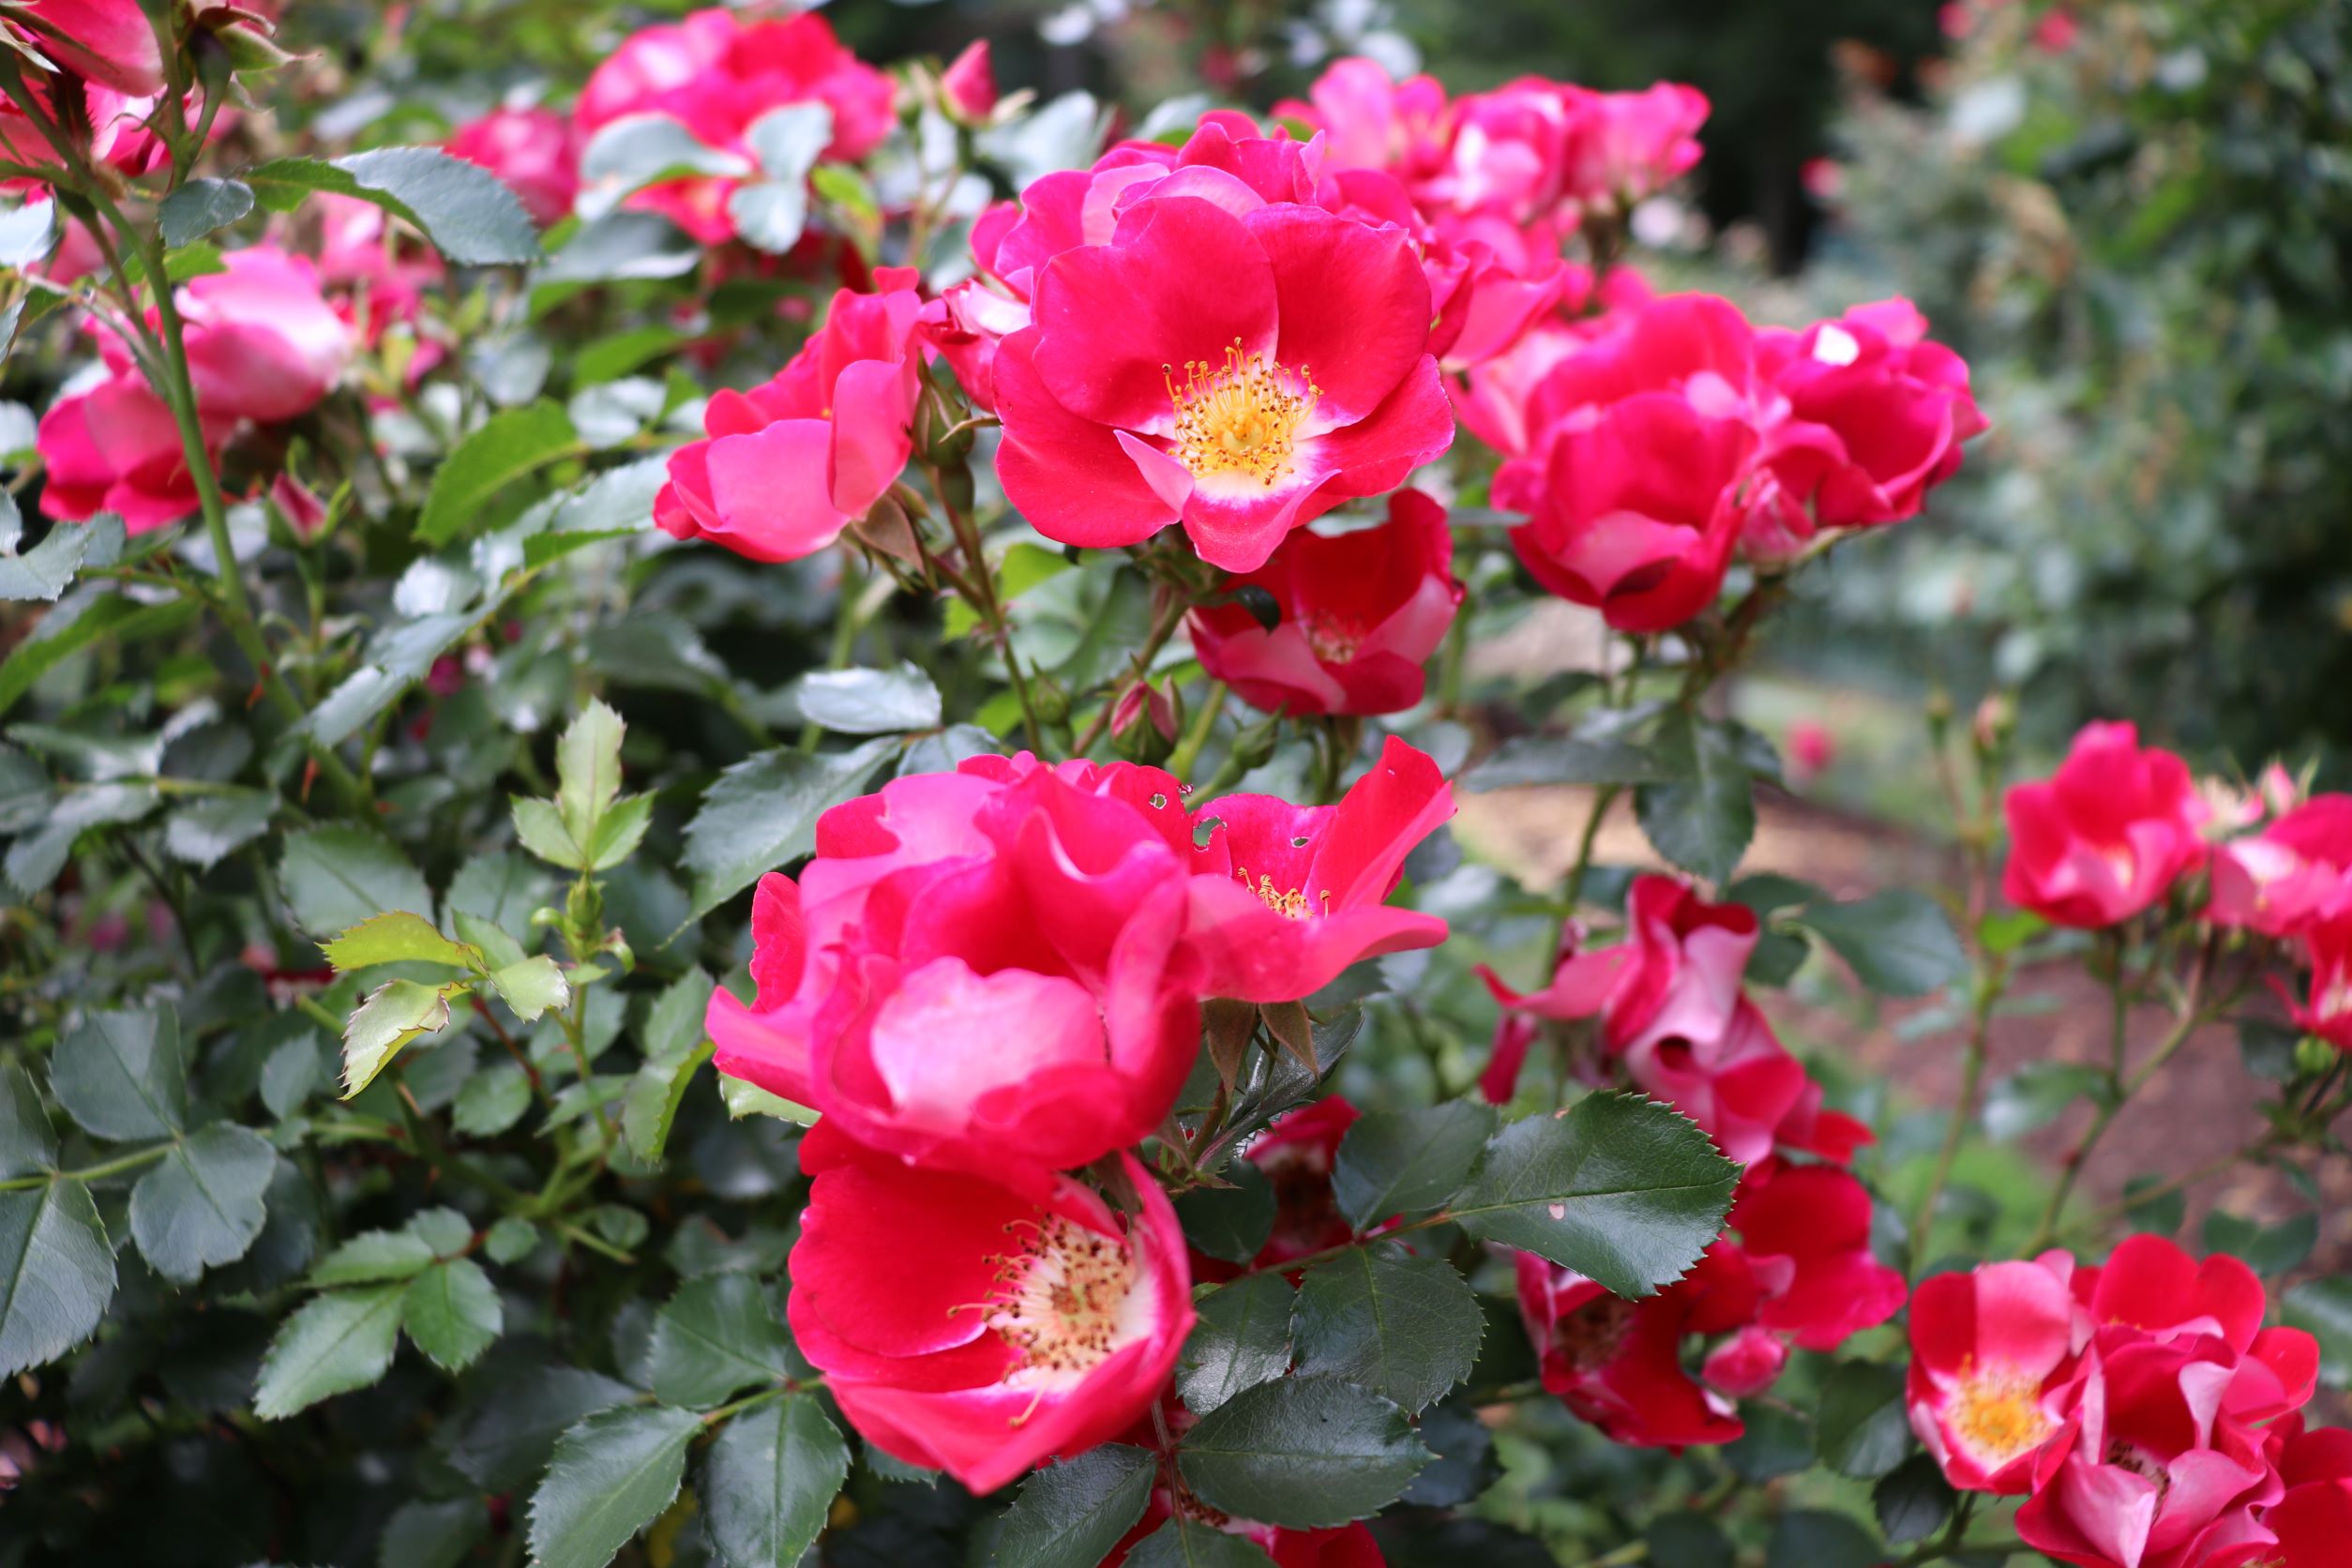 image of roses in the norwich rose garden.